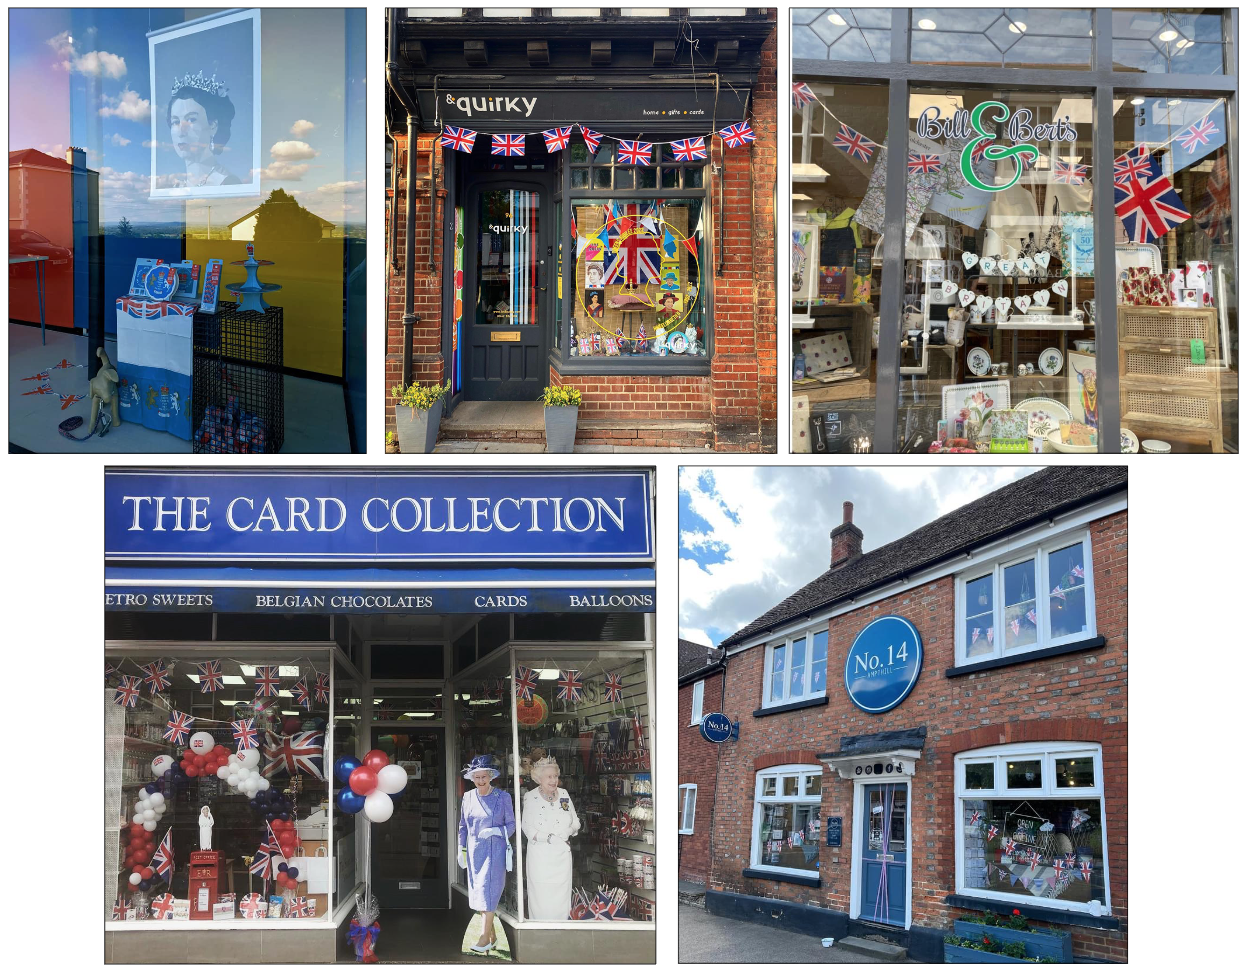 Above: In the window – (clockwise from top left) Austin & Co, &Quirky, Bill & Bert’s, No.14, and The Card Collection